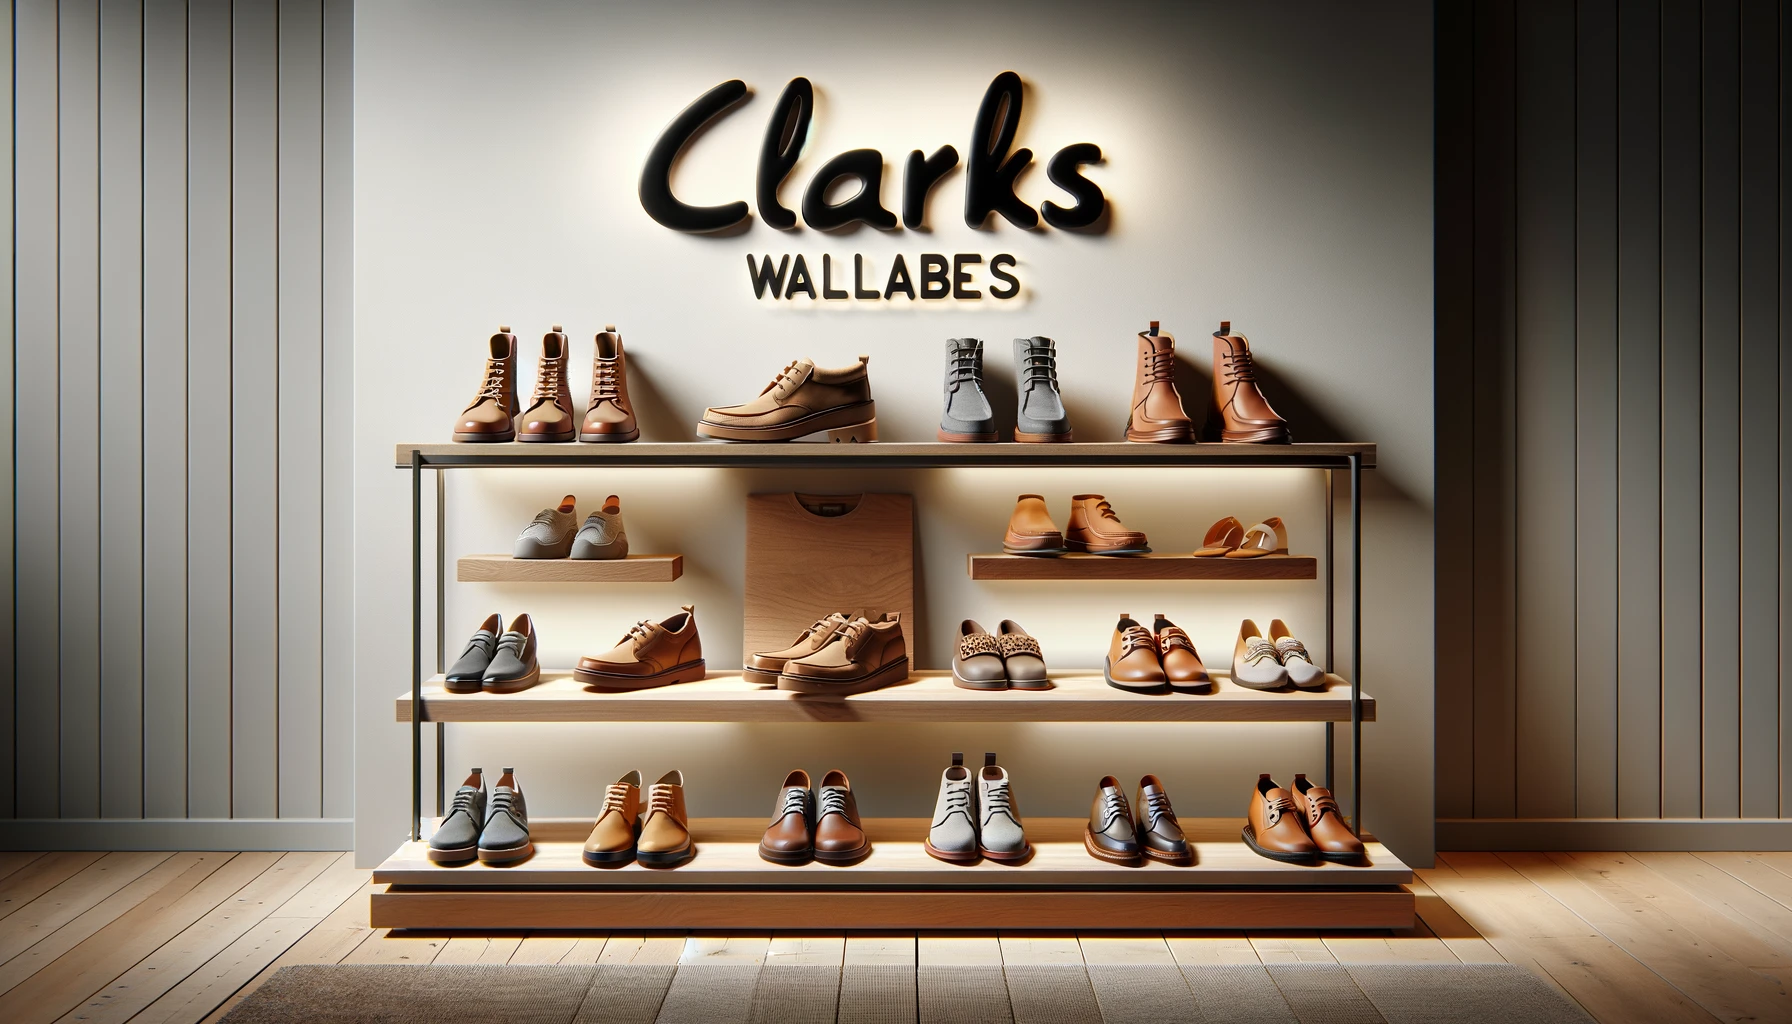 A stylish showcase of Clarks Wallabees men's and women's line-up, displaying a variety of footwear options arranged on a modern, minimalistic display rack against a simple, elegant background. Include both casual and formal styles to reflect versatility. The text 'Clarks' is subtly integrated into the background. The image should be horizontal, captured in a well-lit retail environment to enhance the textures and colors of the shoes, with an aspect ratio of 16:9.